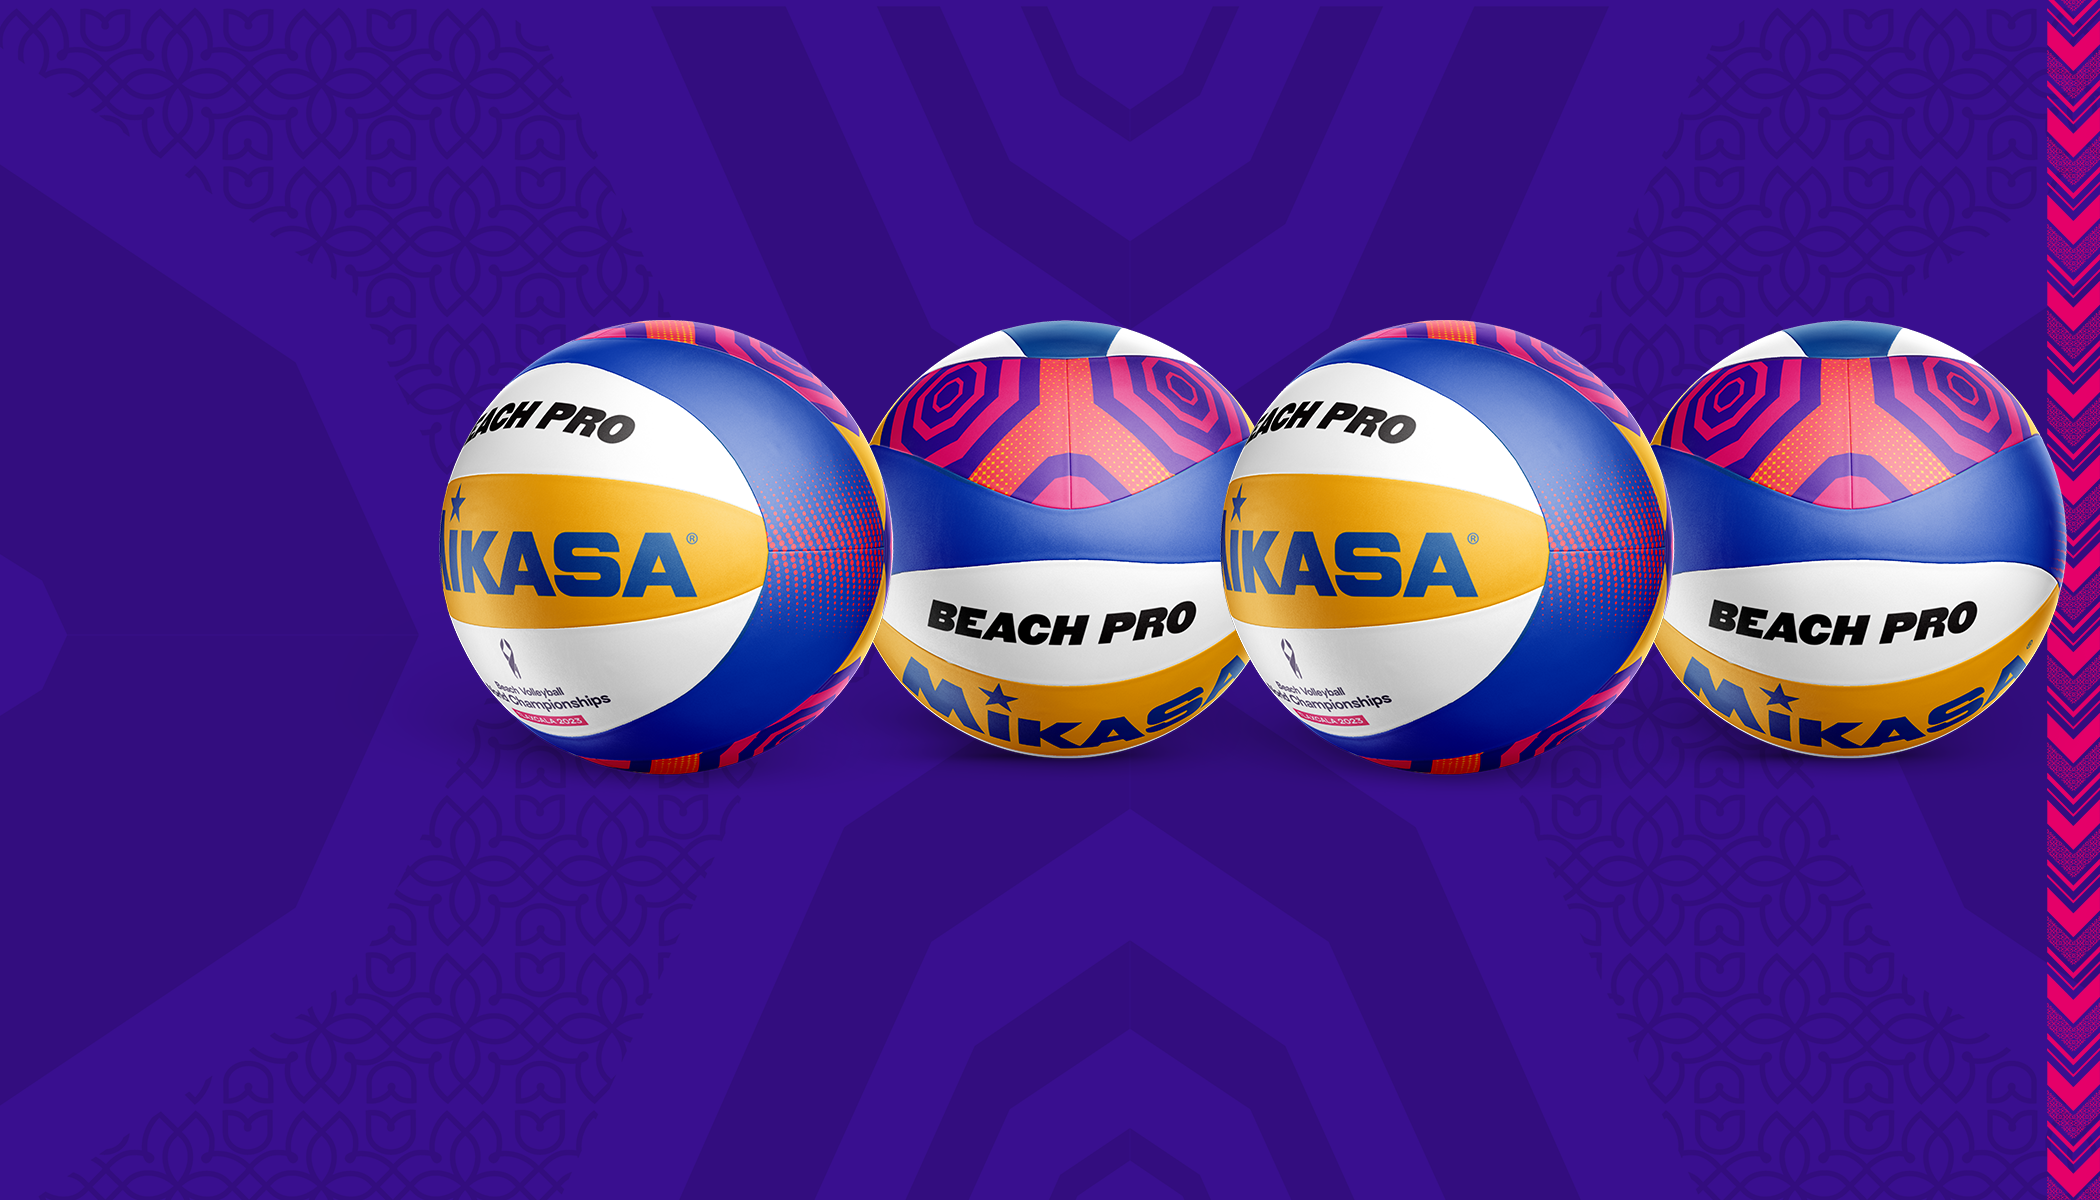 The Official Volleyball World Store